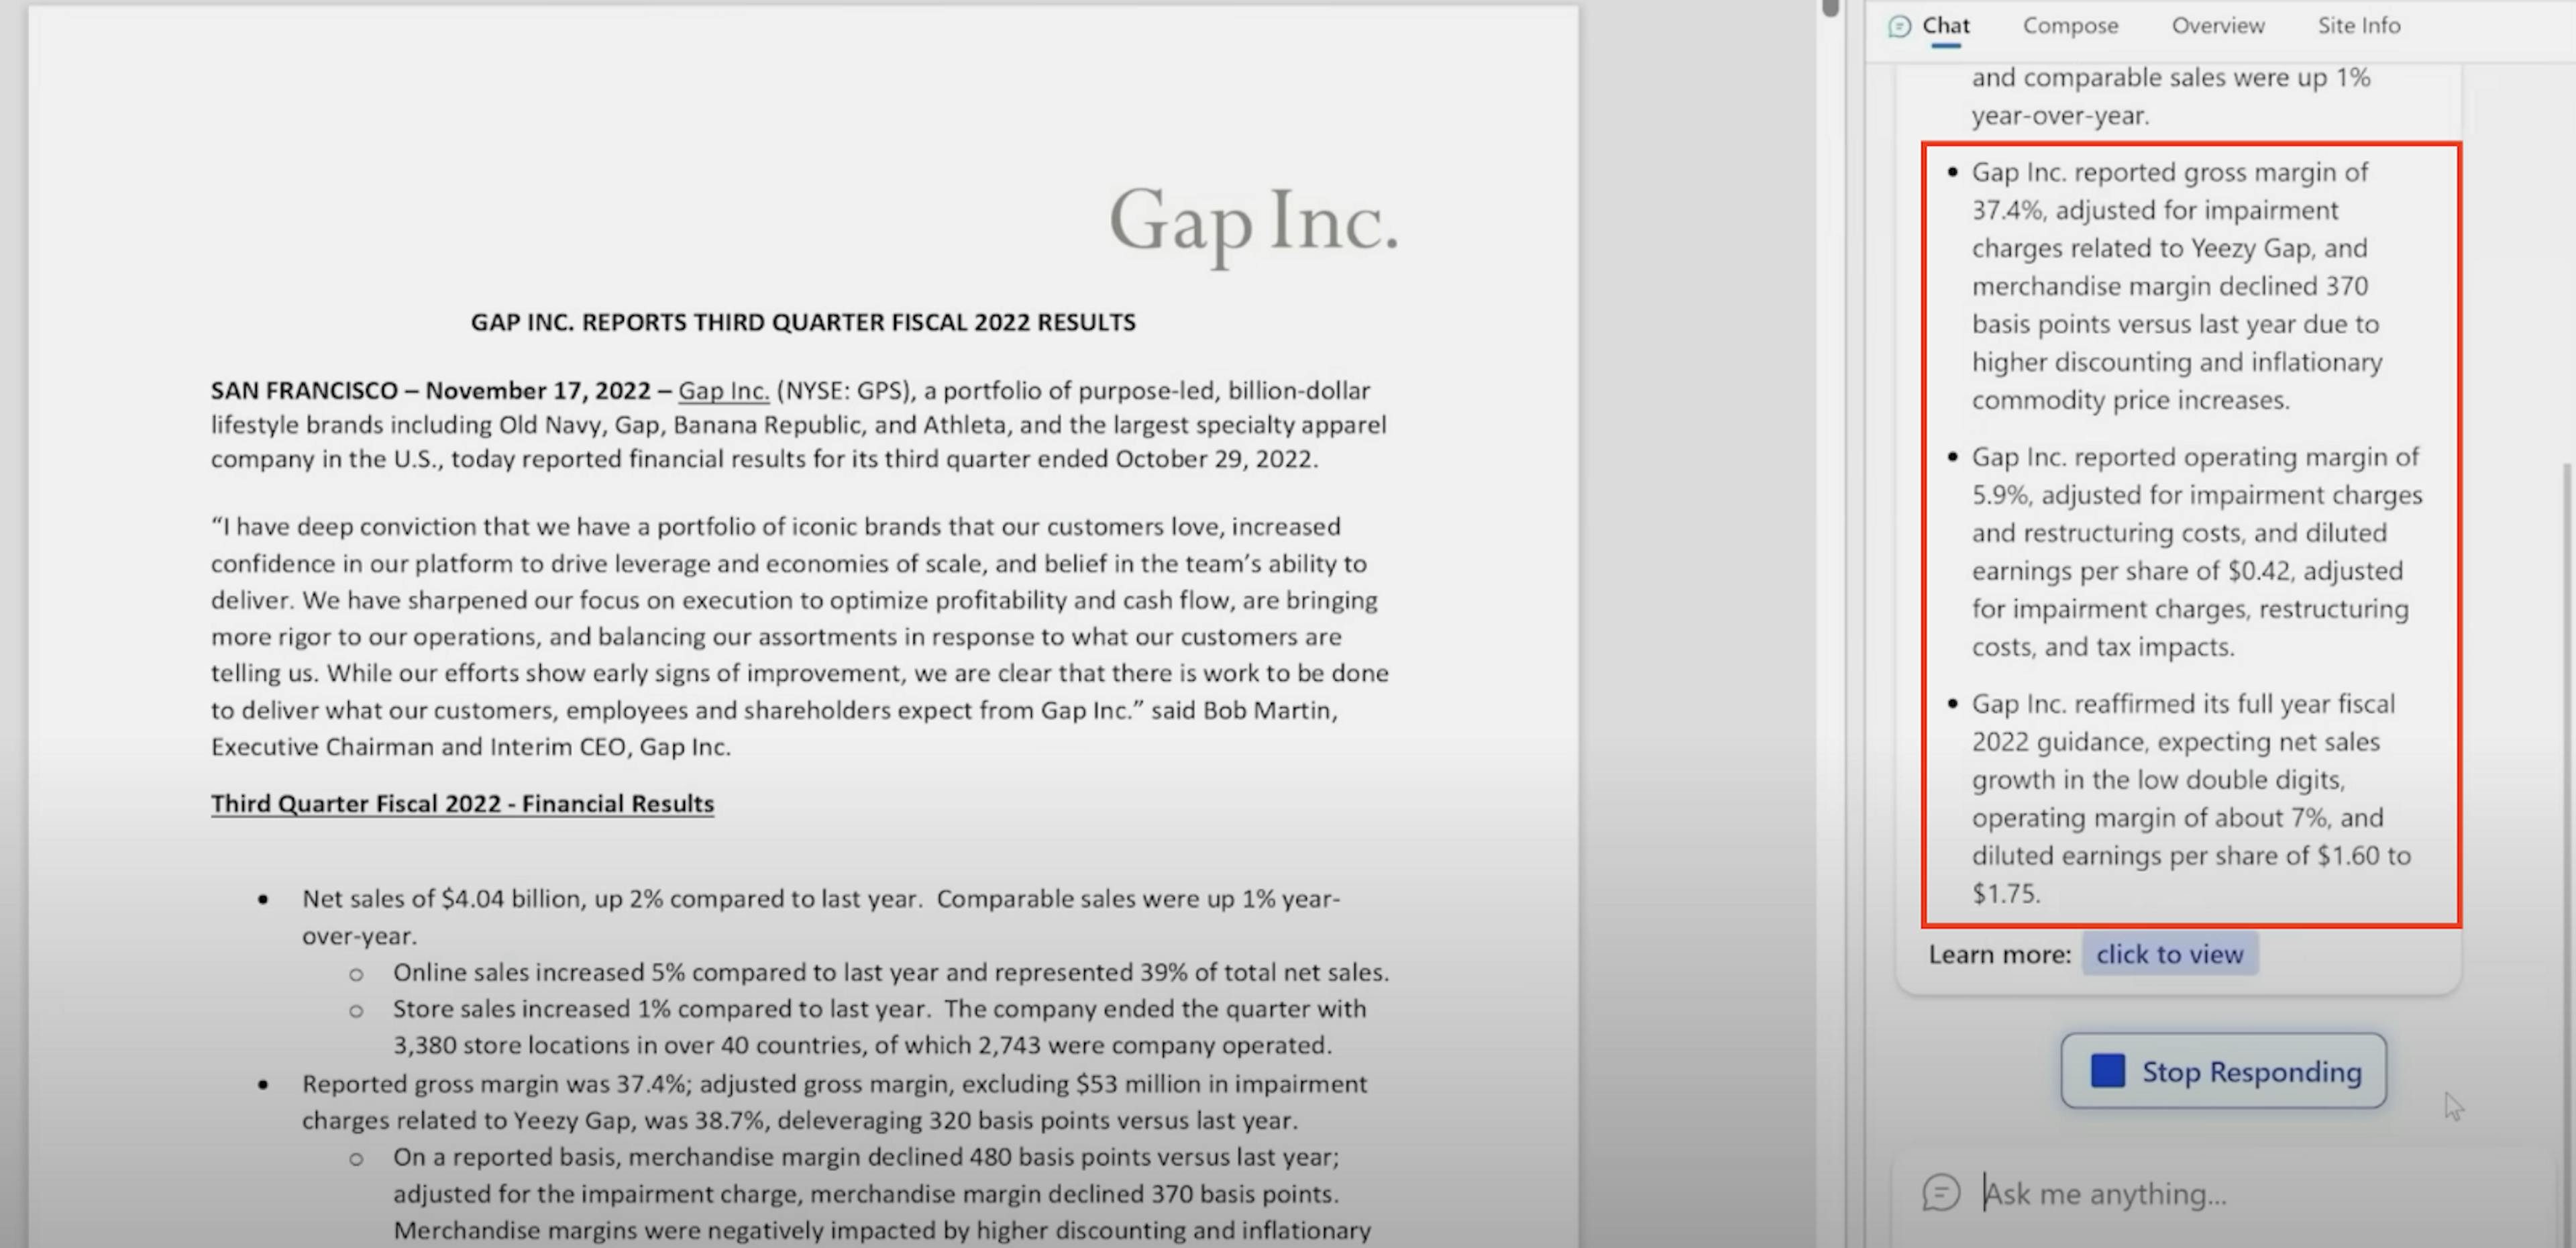 Figure 1. Summary of the Gap Inc. fiscal report by the new Bing in Press Release.